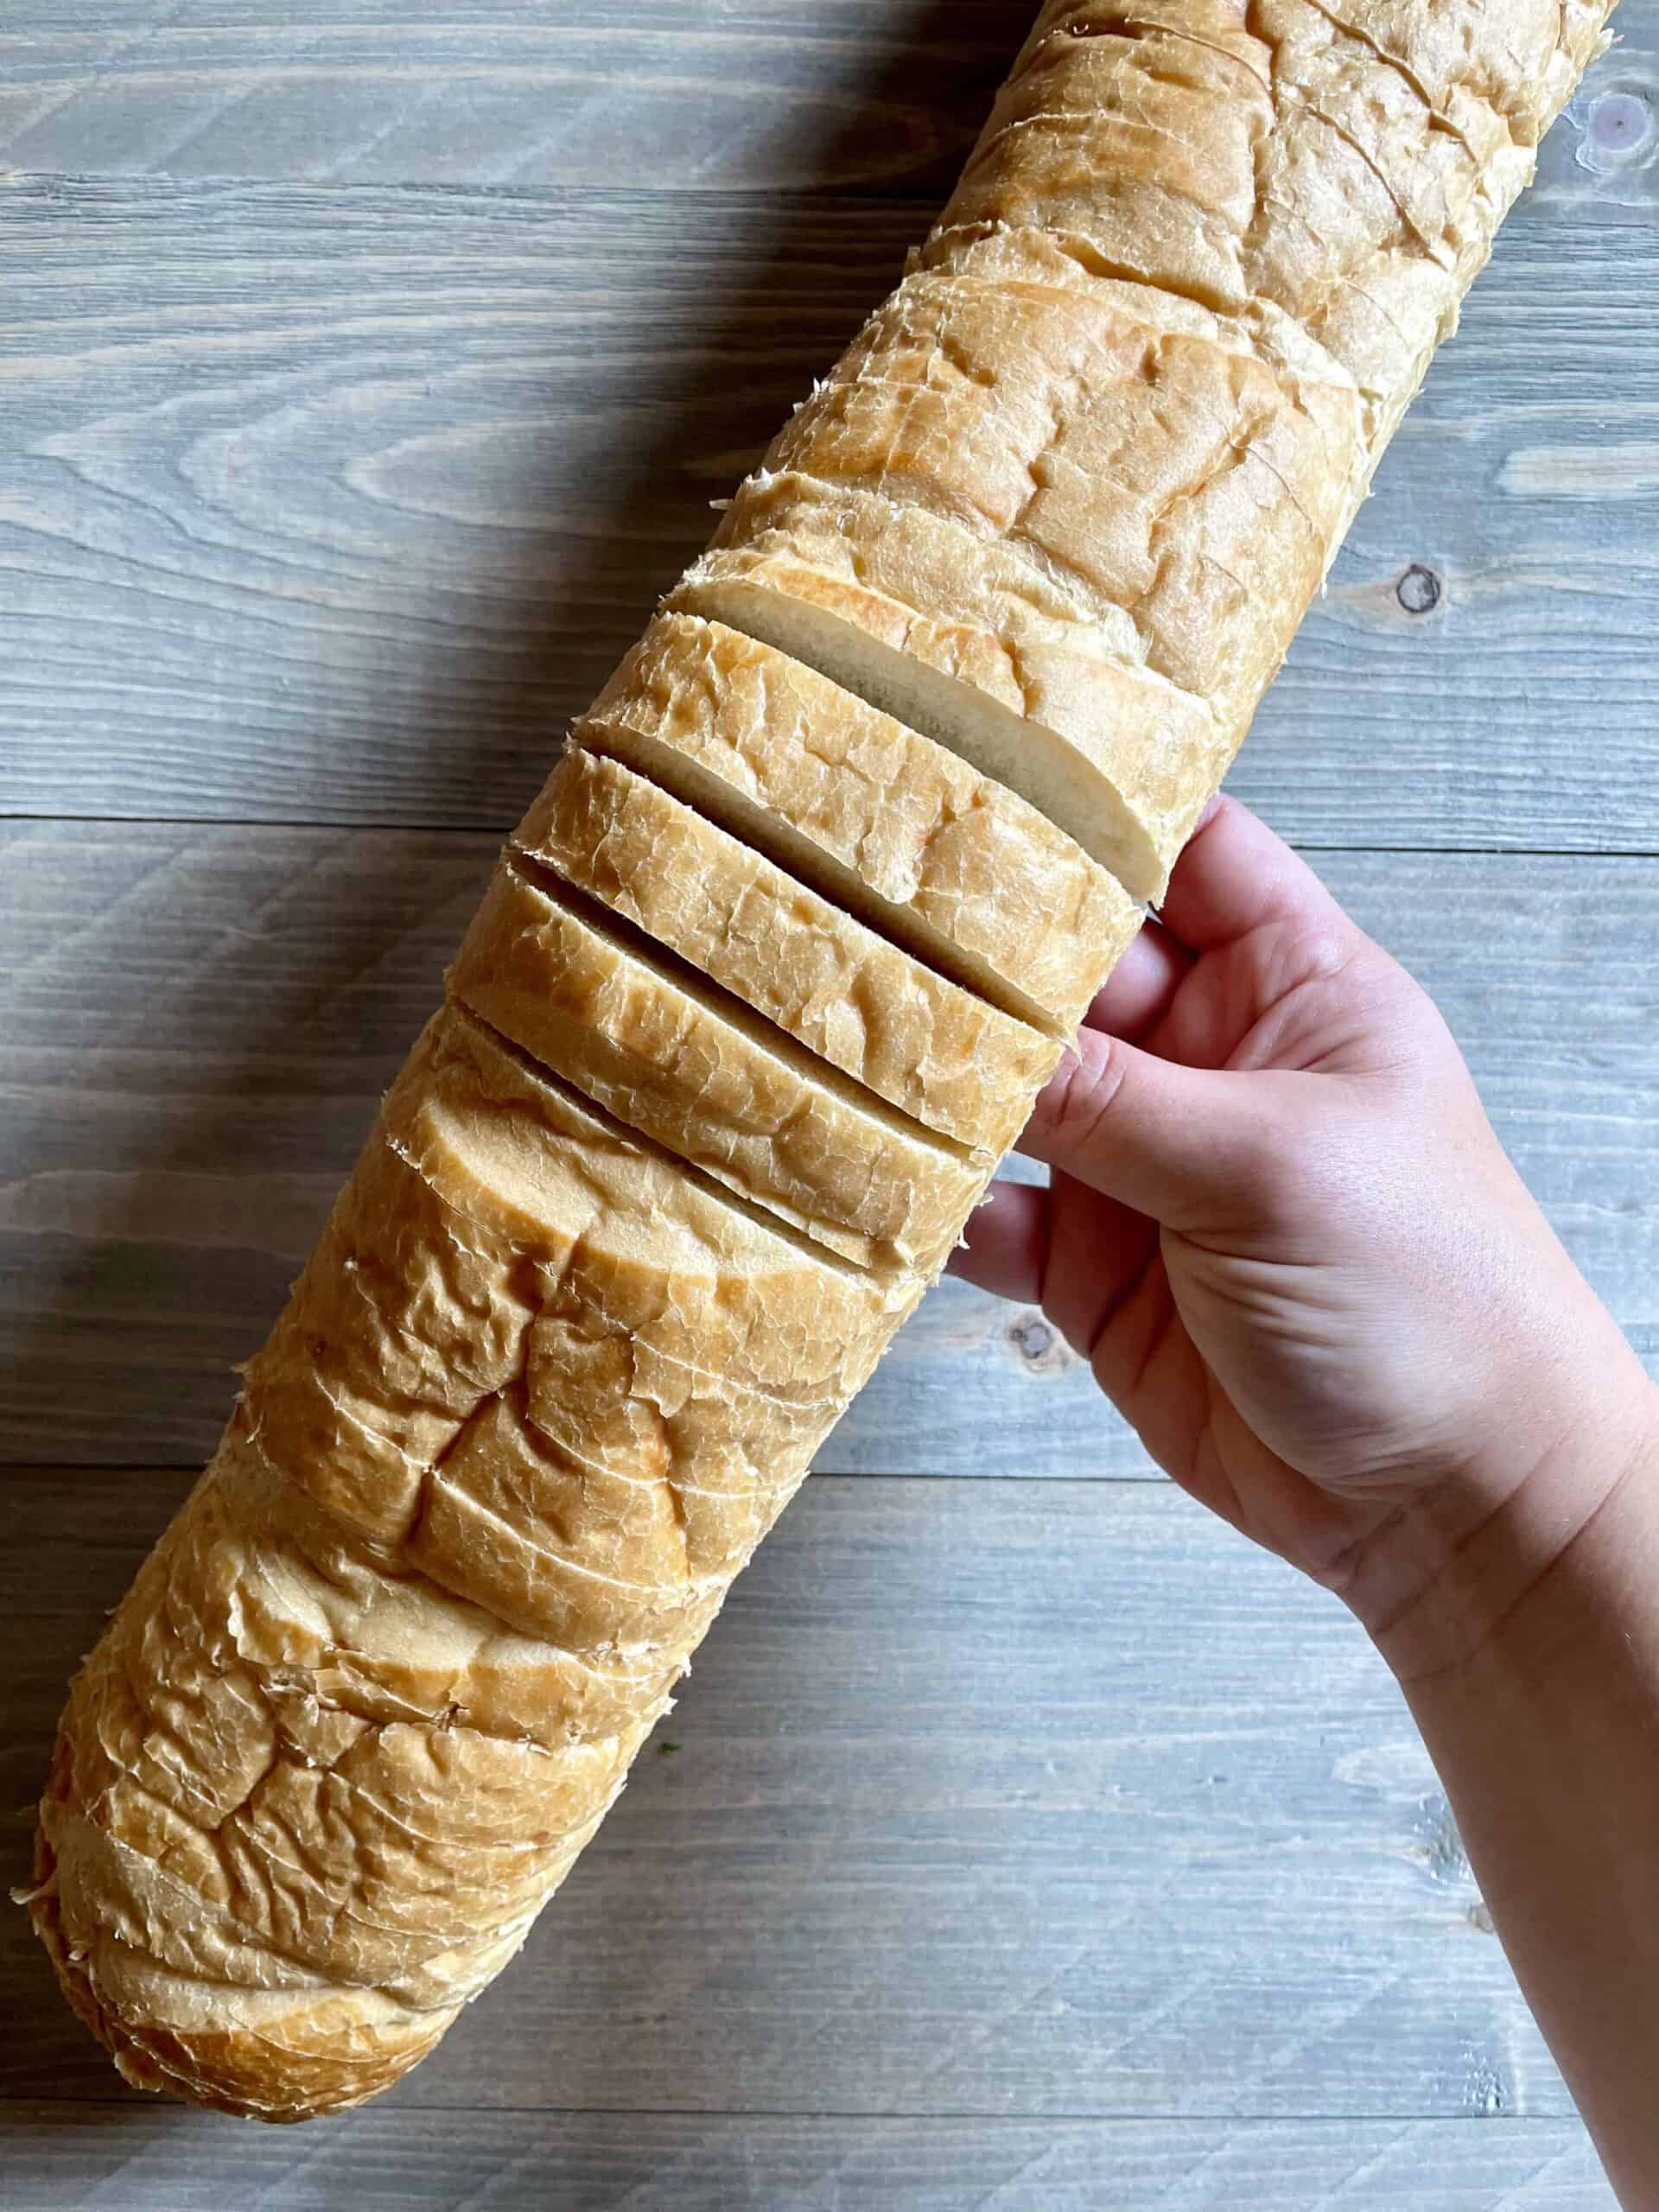 French bread is shown with slices cut into it. The bread is held up by a hand.